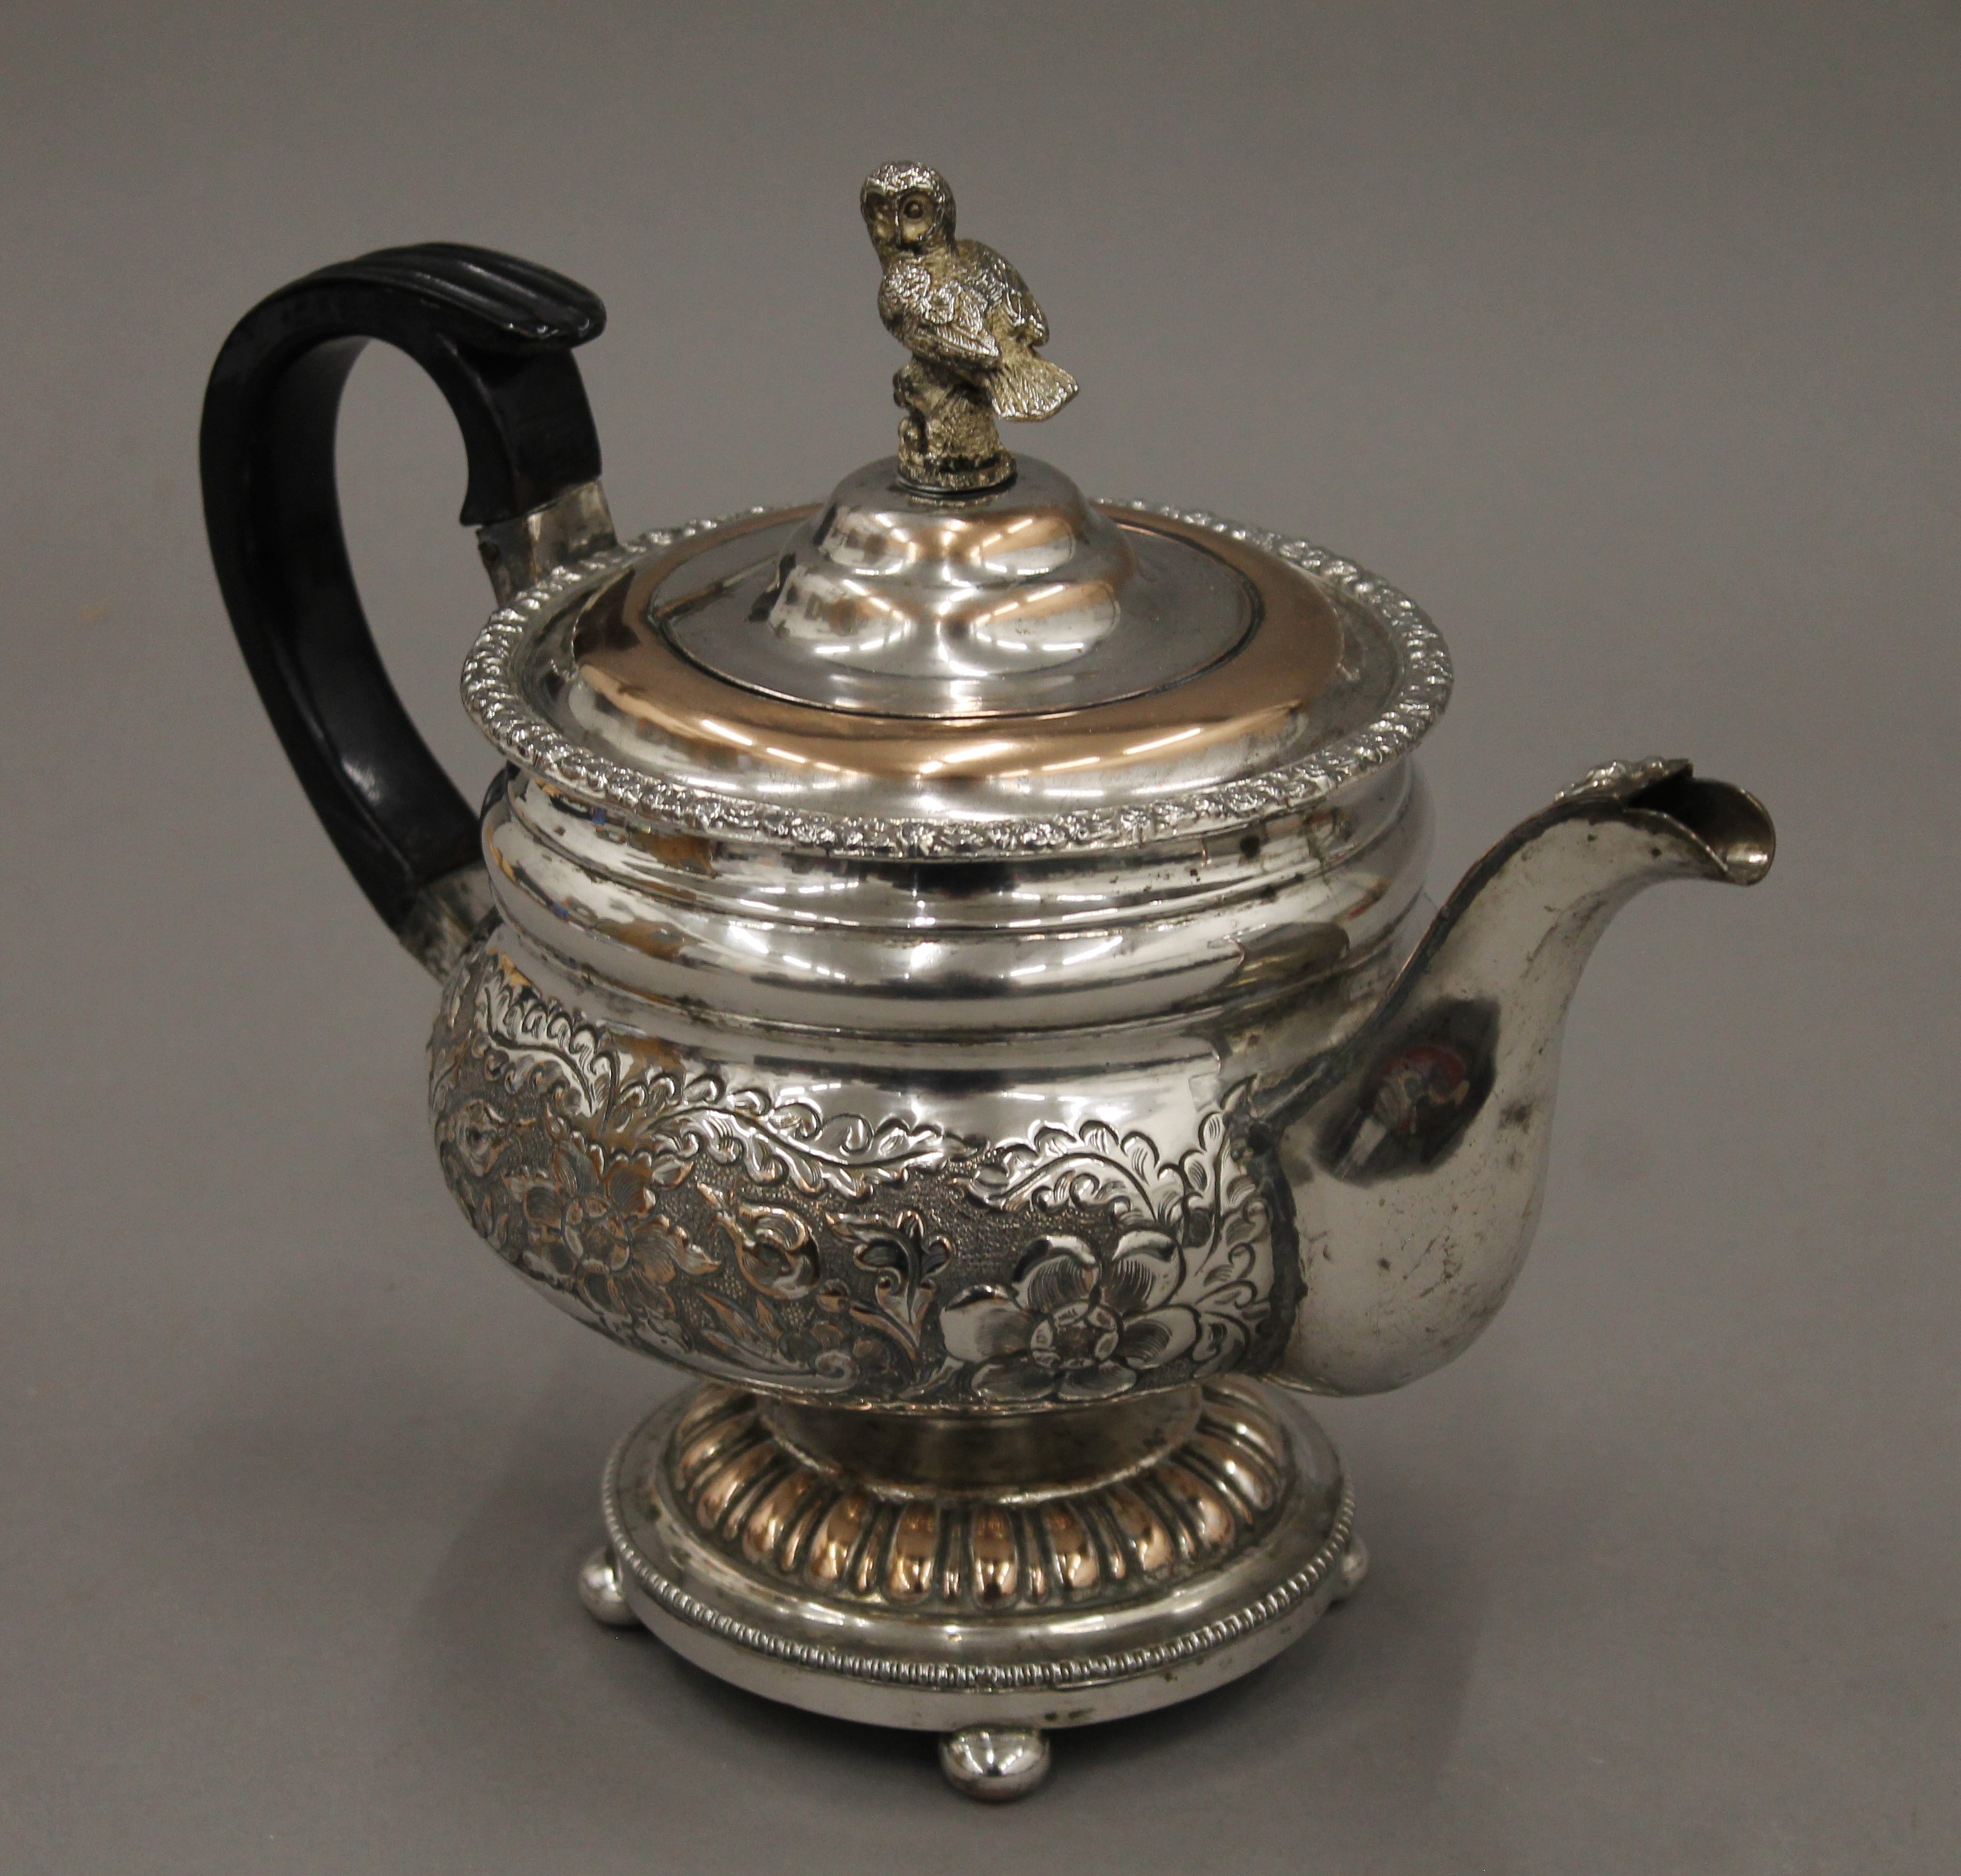 A Victorian three-piece ornate silver plated tea set and a tray. - Image 2 of 4